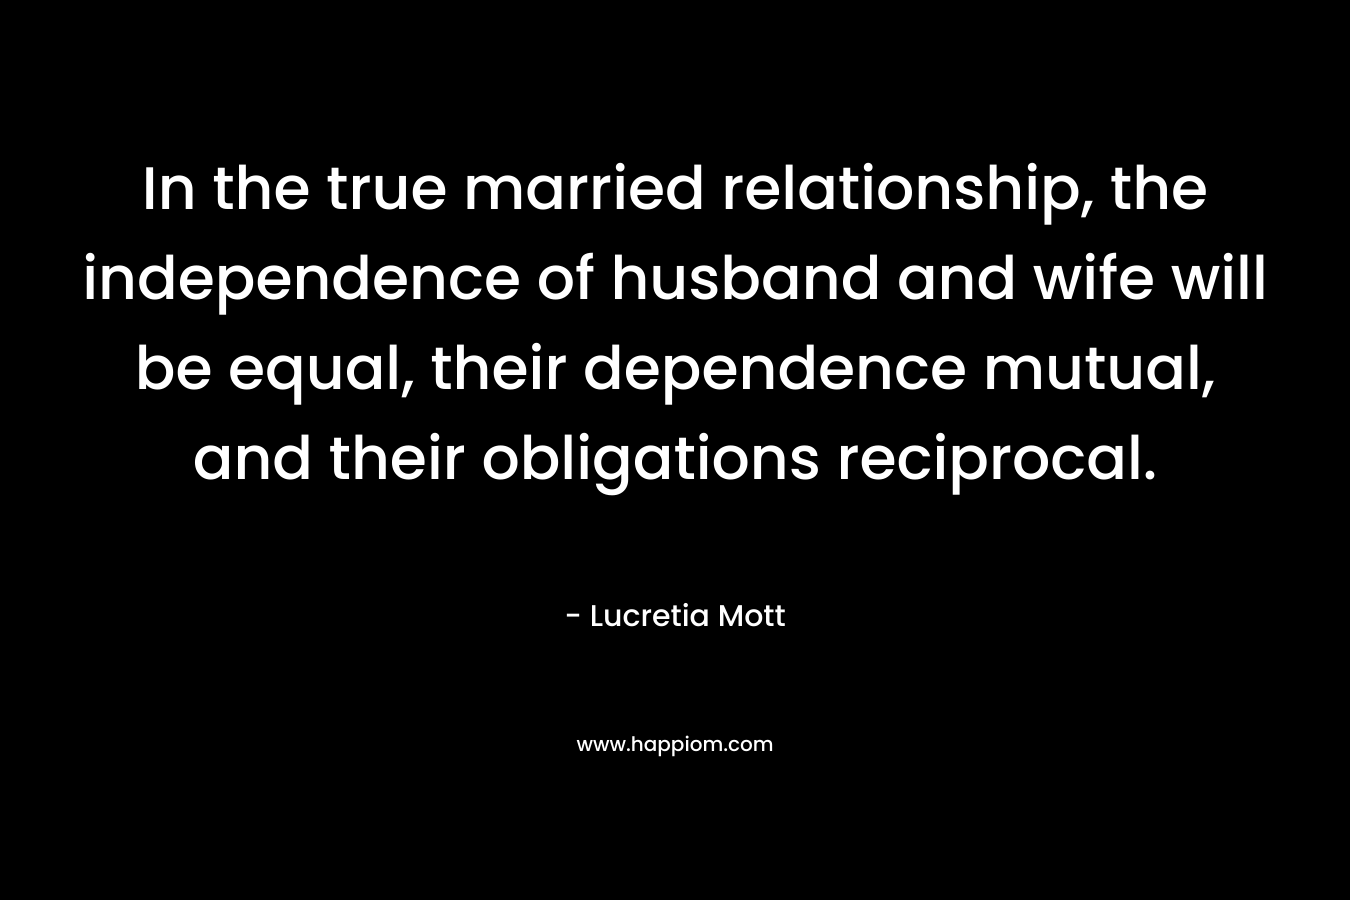 In the true married relationship, the independence of husband and wife will be equal, their dependence mutual, and their obligations reciprocal. – Lucretia Mott